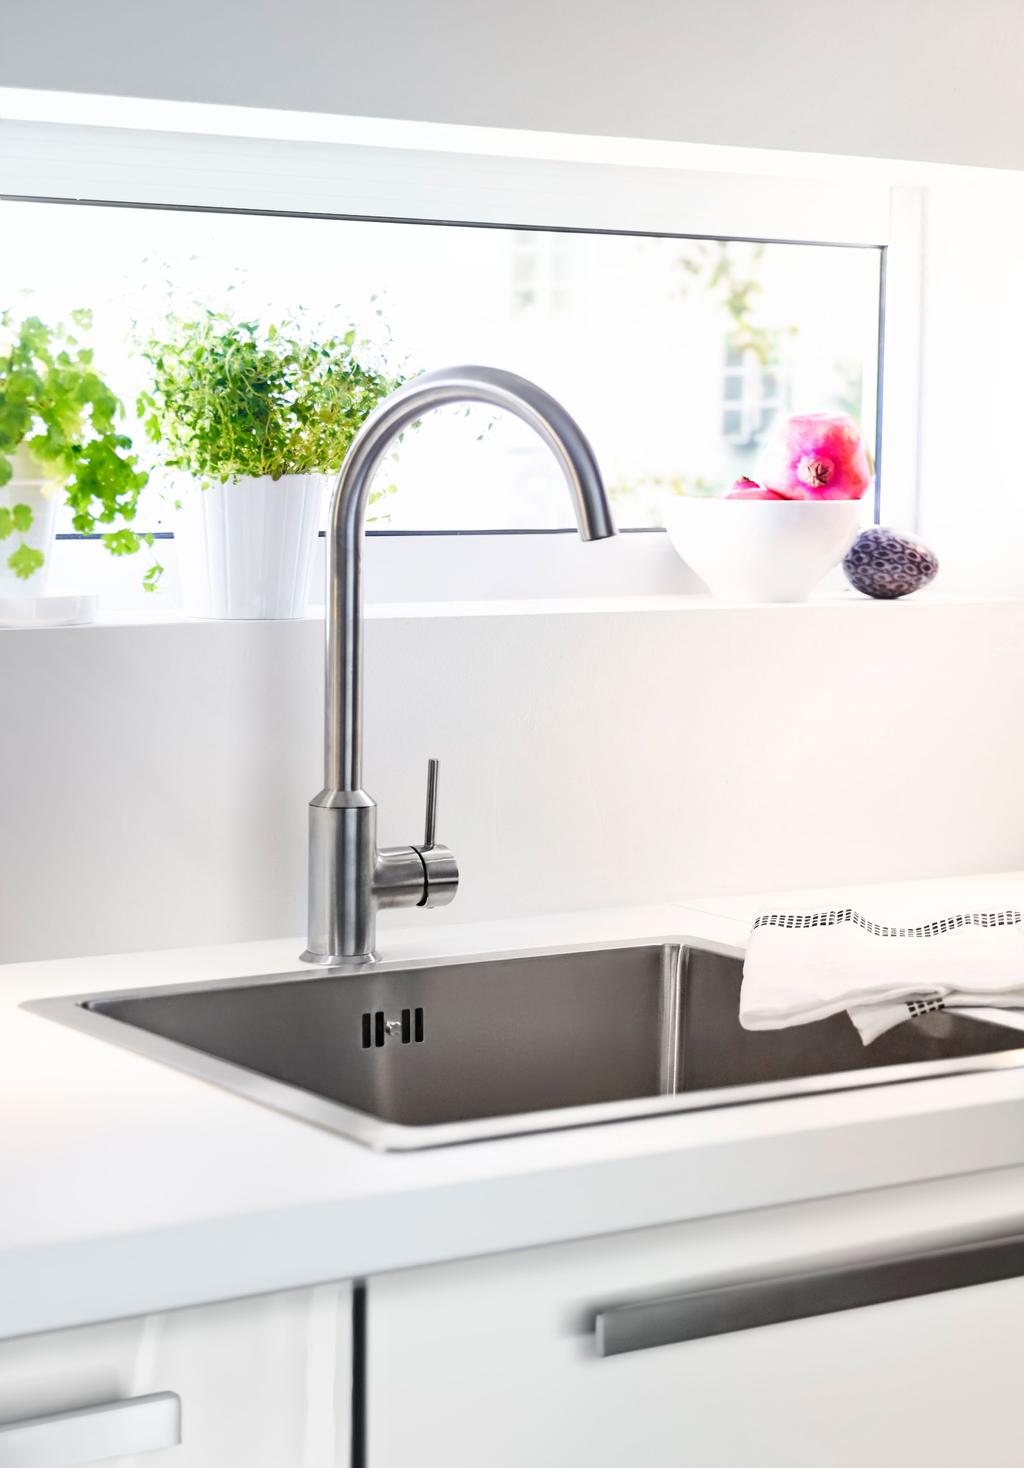 Buying guide worktops, sinks & taps All the products (shown here) may not be available at the store.